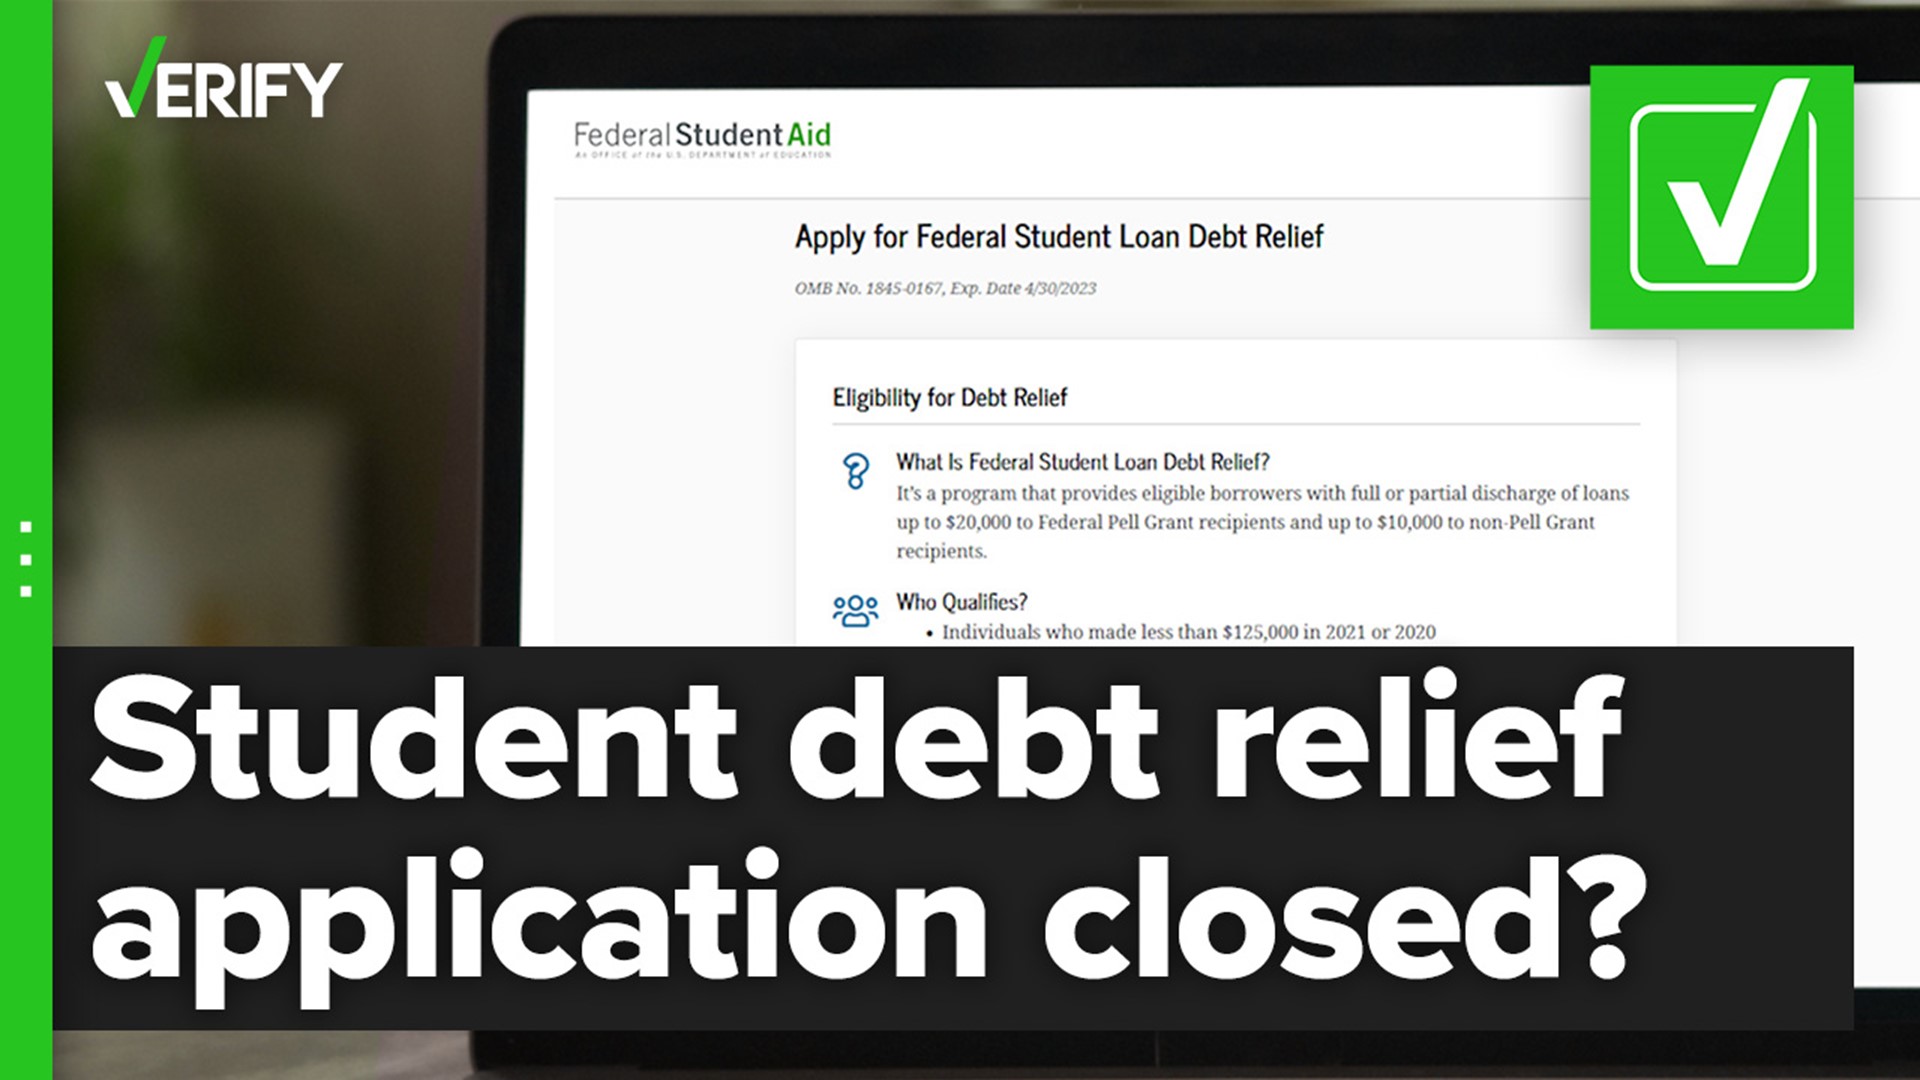 A district judge declared Biden’s debt relief plan to be unconstitutional in Brown v. Department of Education. The administration is appealing the decision.